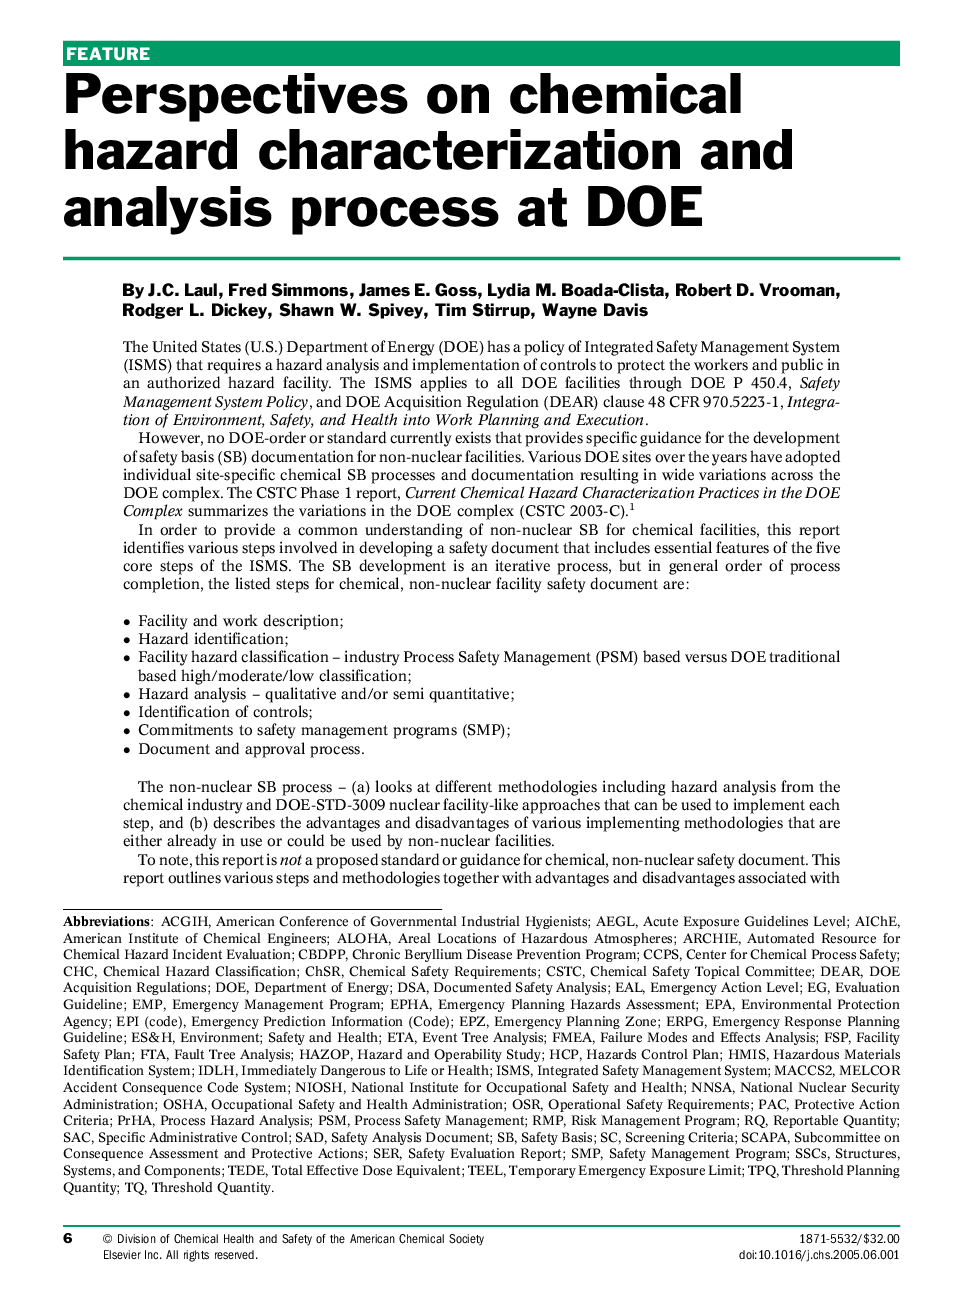 Perspectives on chemical hazard characterization and analysis process at DOE